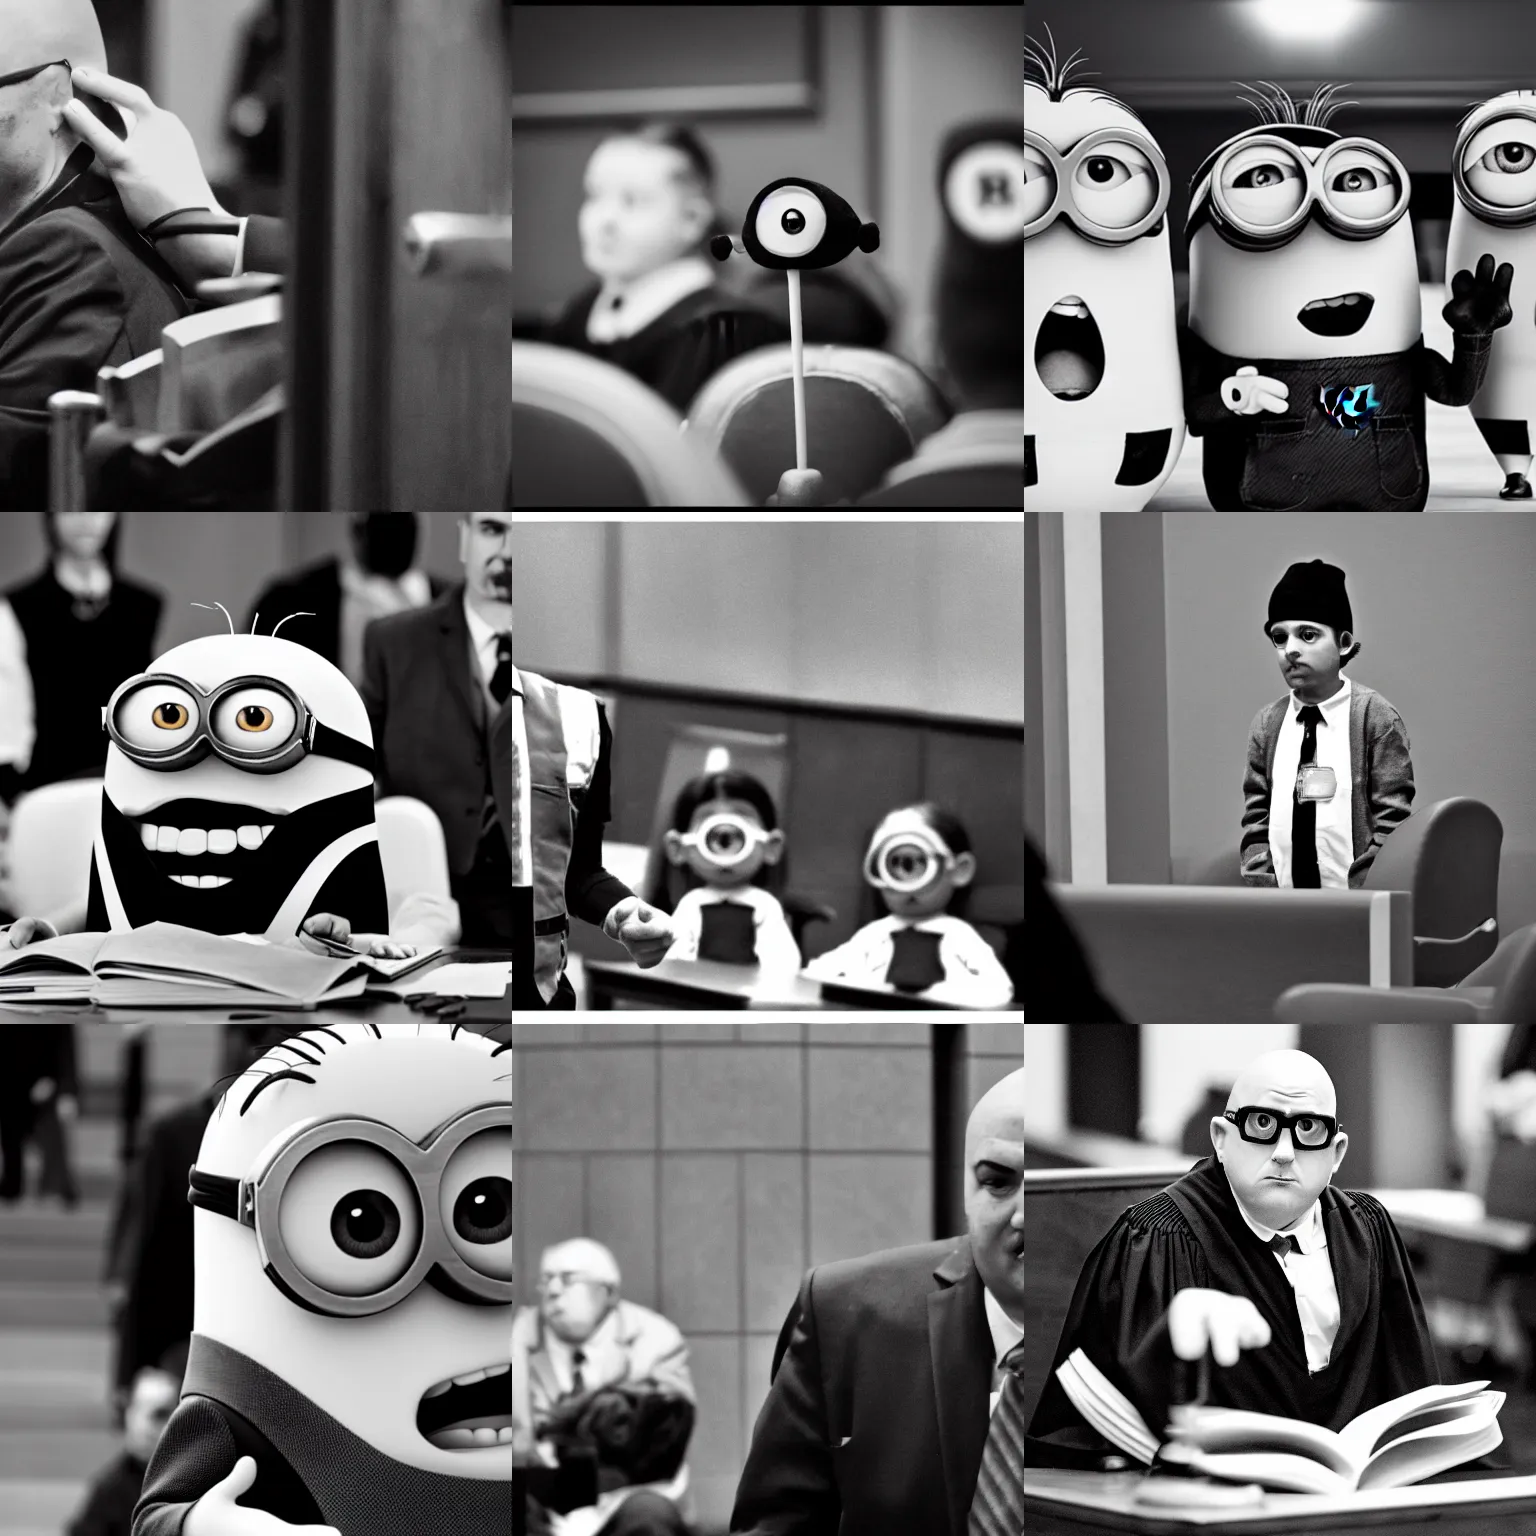 Prompt: A black and white photograph of a Minion from Despicable Me on trial in court for his crimes against humanity